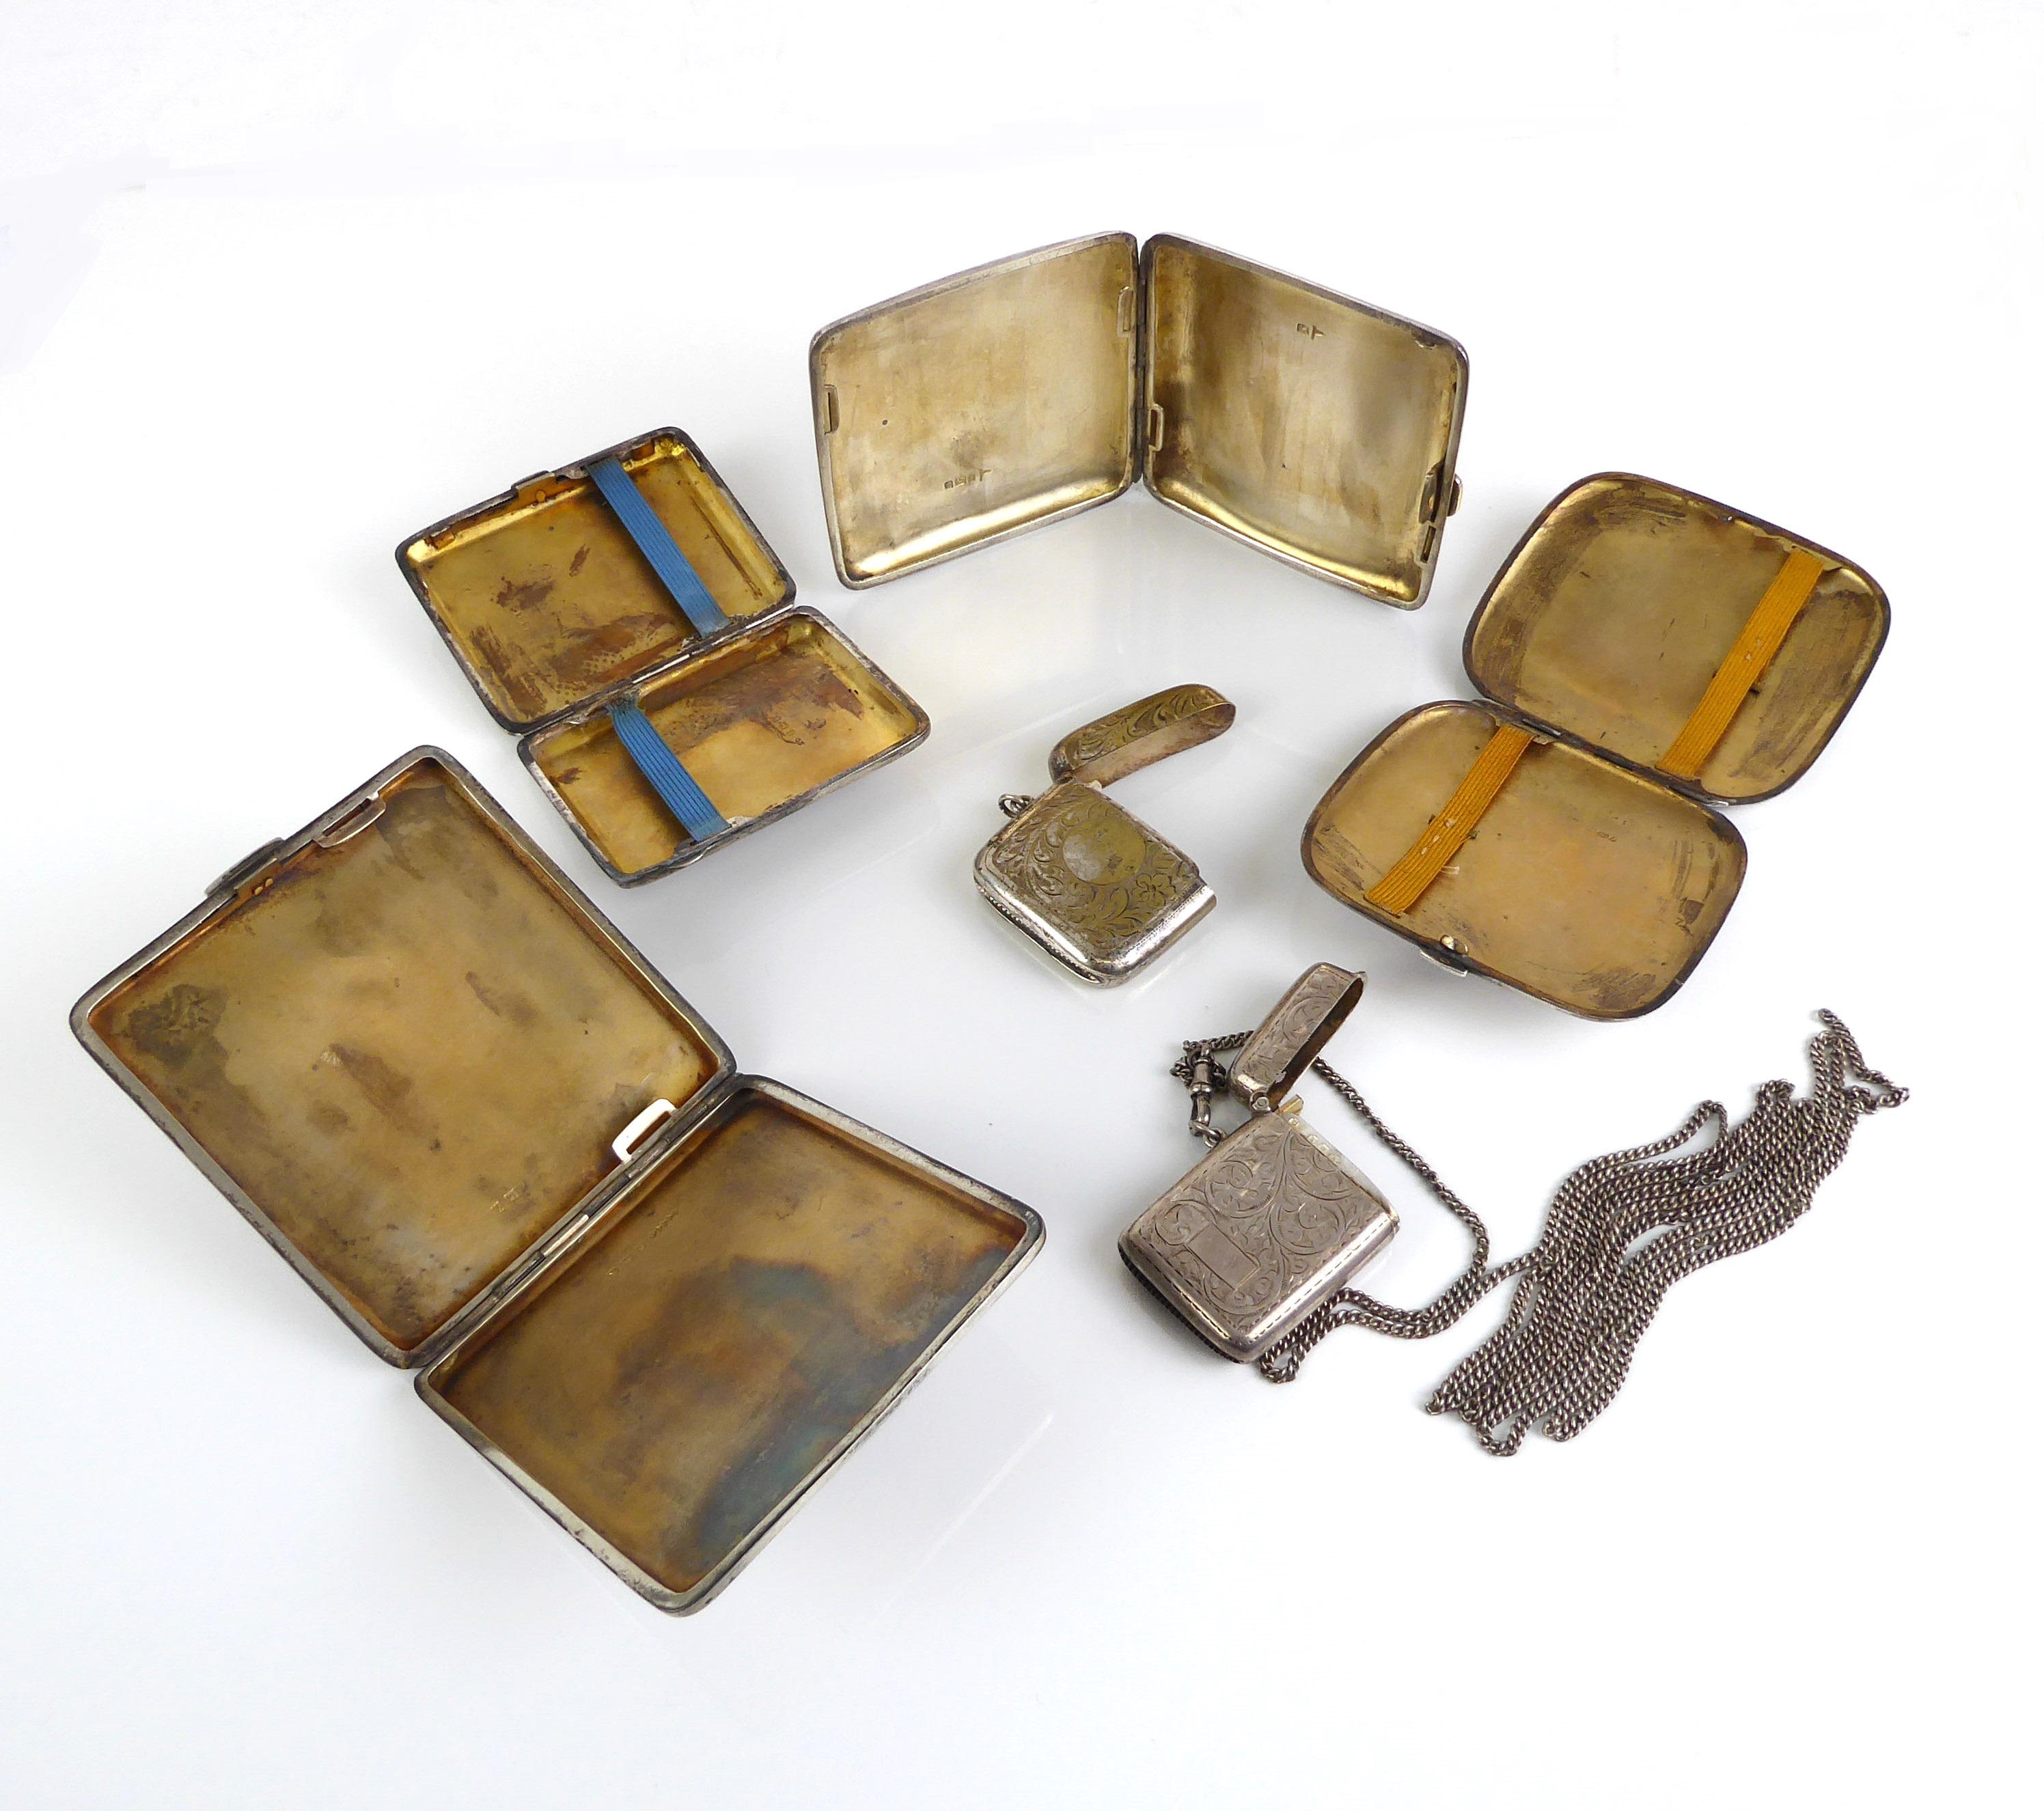 Four silver cigarette cases - with engine-turned and chased decoration, early to mid-20th century; - Image 3 of 3